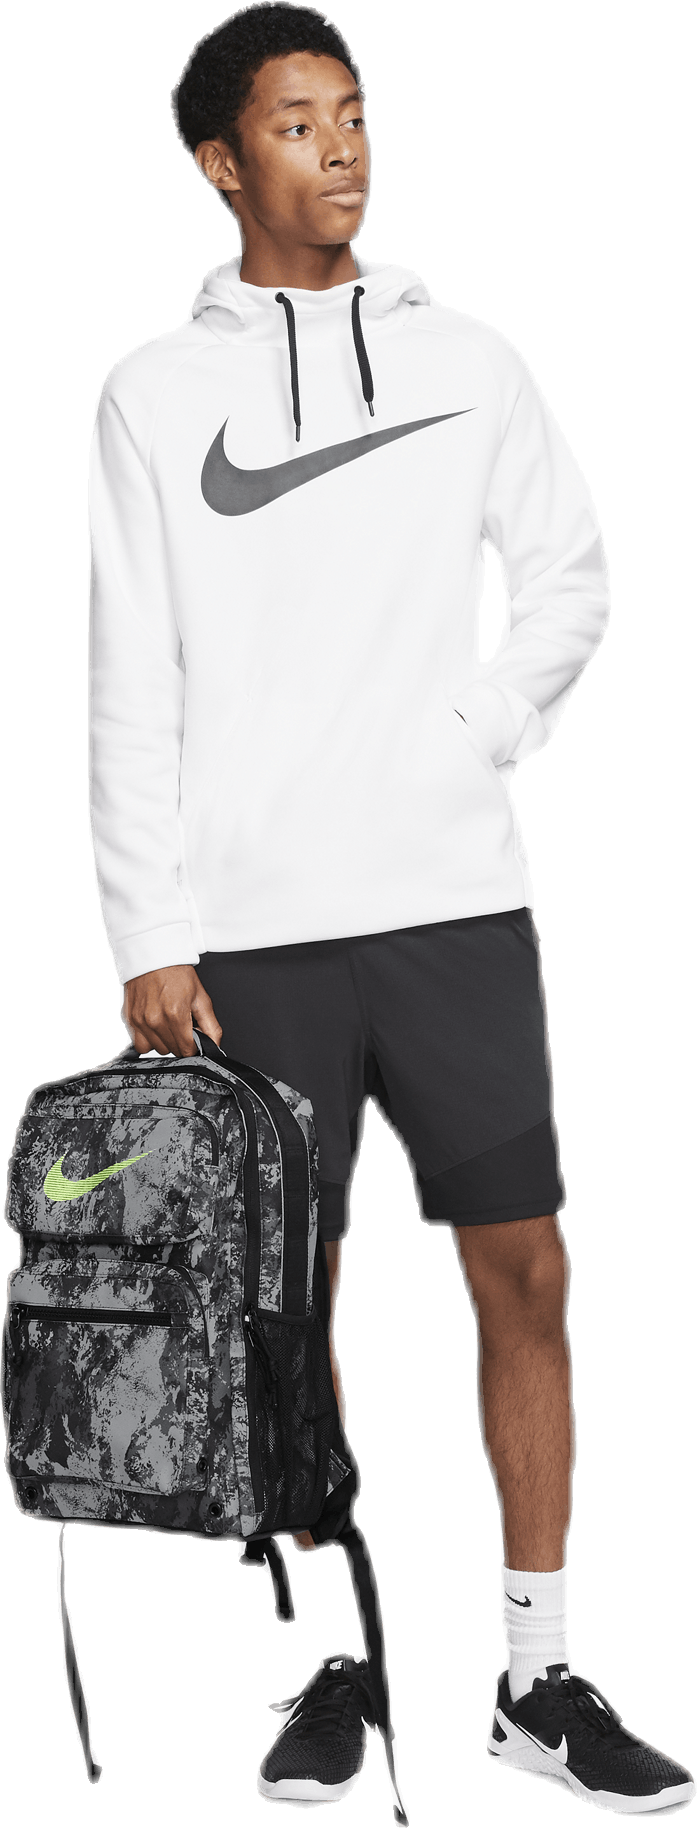 Utility Speed Backpack Particle Grey/Black/Lime Blast